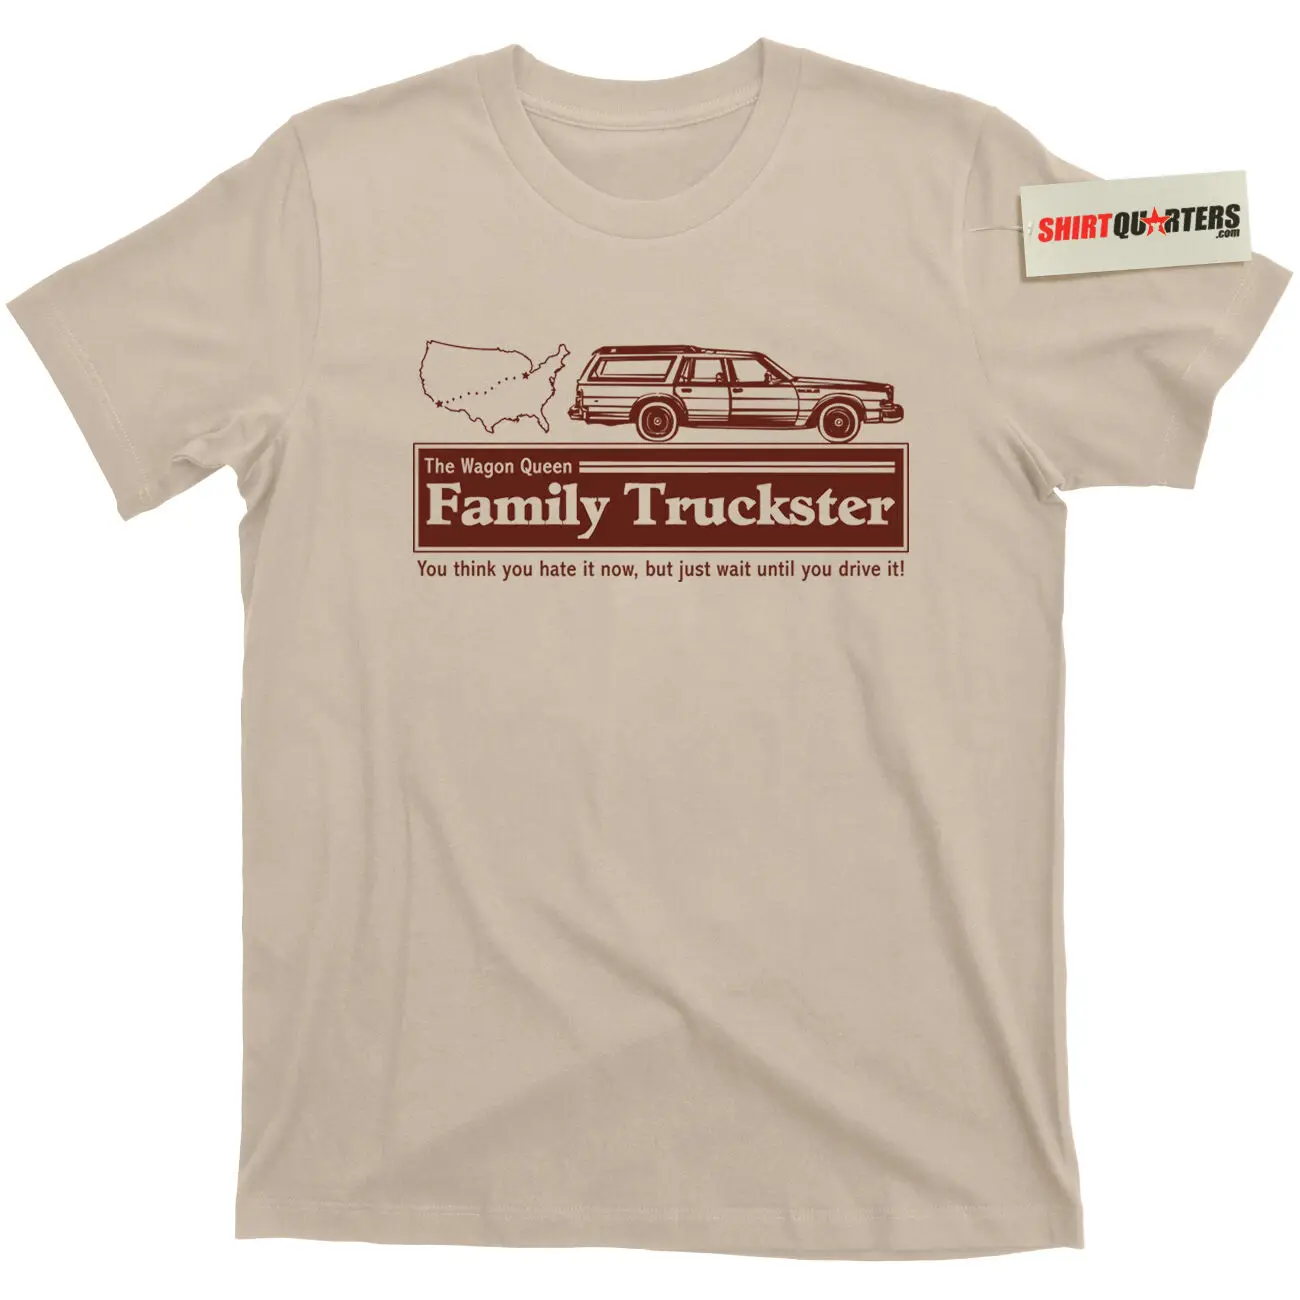 National Lampoon's WalleyWorld Griswold Family Vacation Shirt 